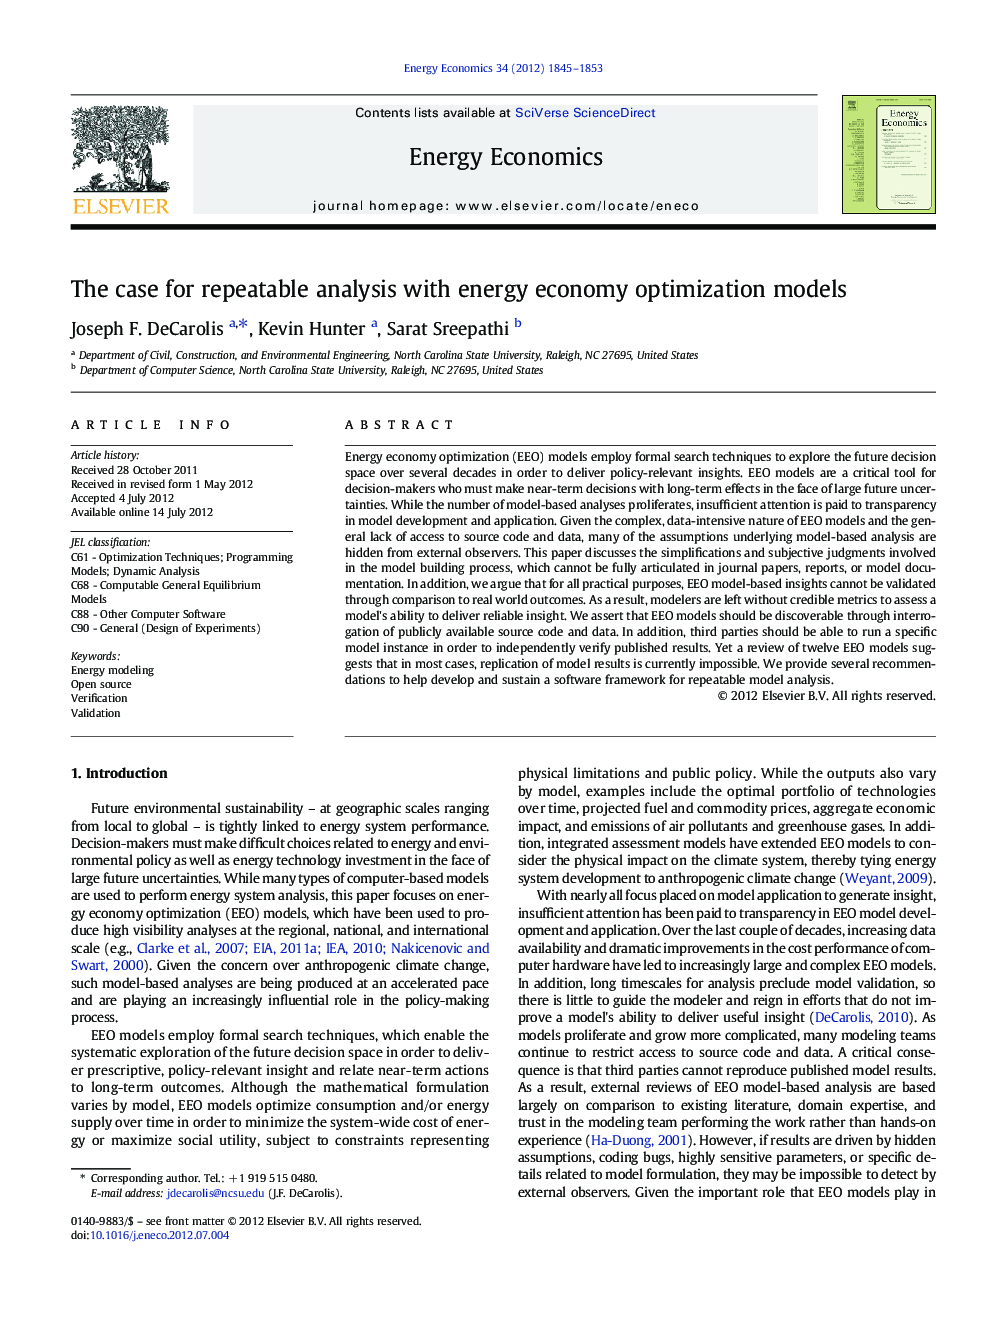 The case for repeatable analysis with energy economy optimization models